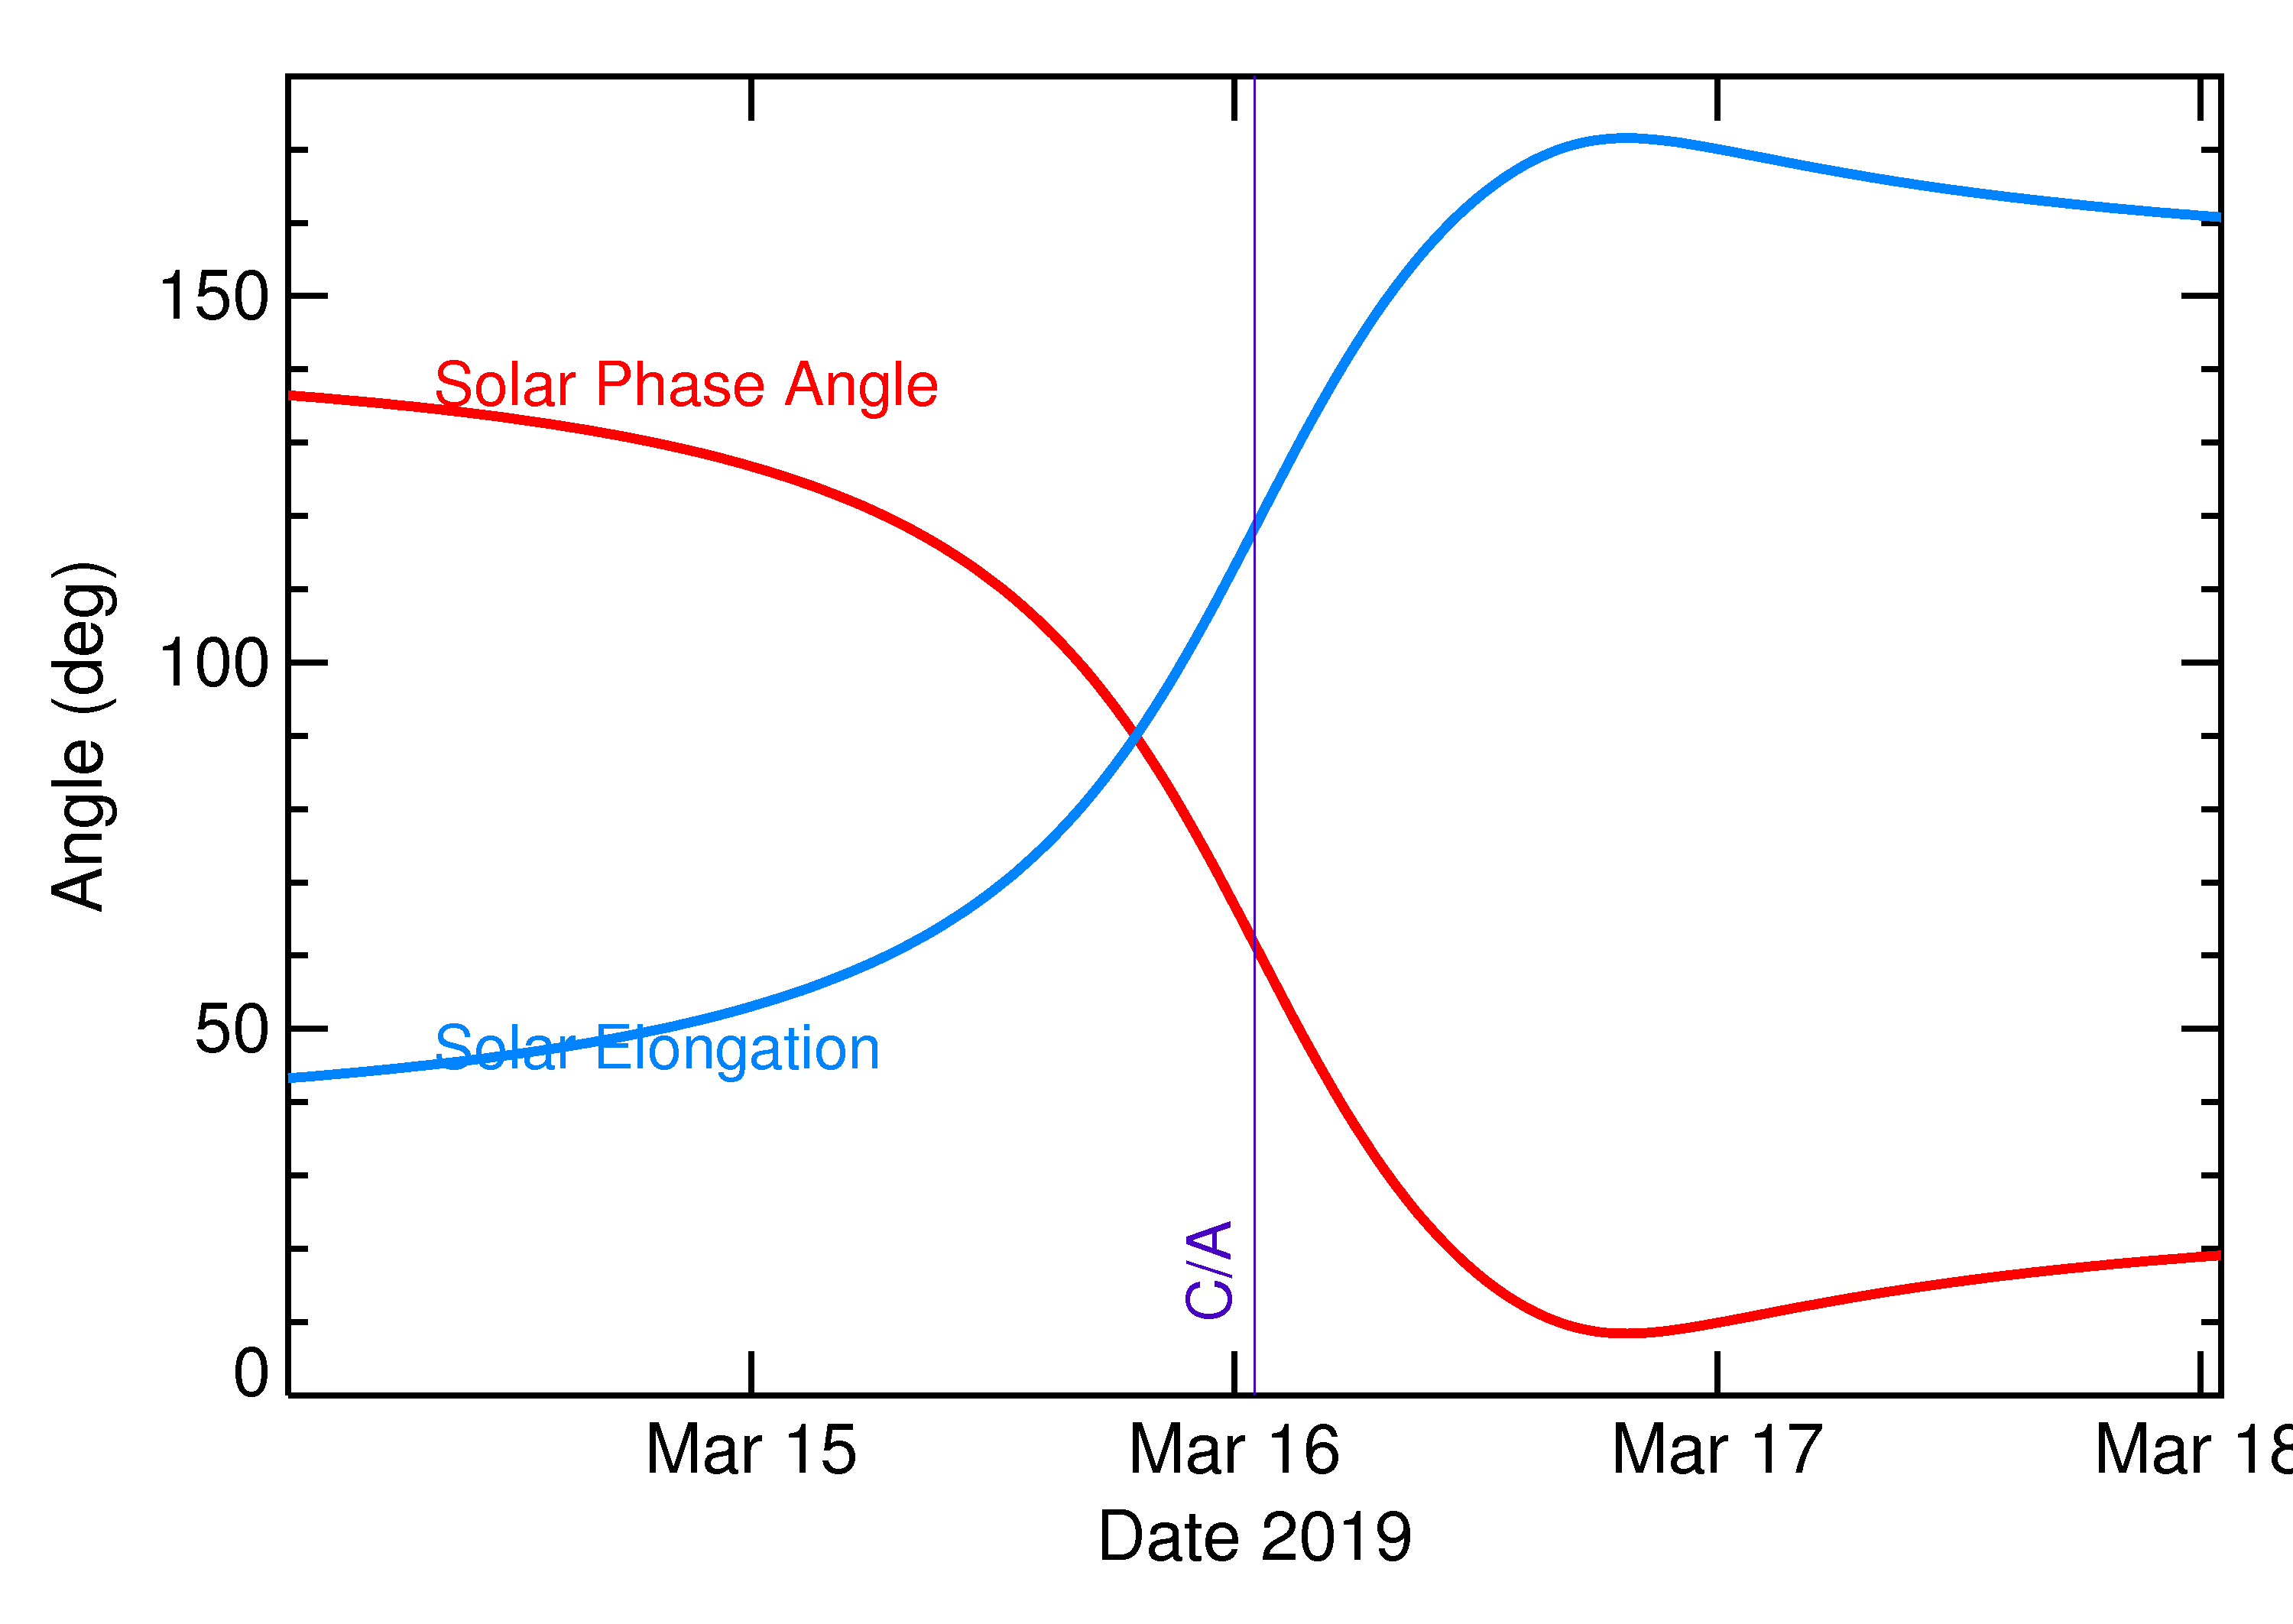 Solar Elongation and Solar Phase Angle of 2019 FA in the days around closest approach